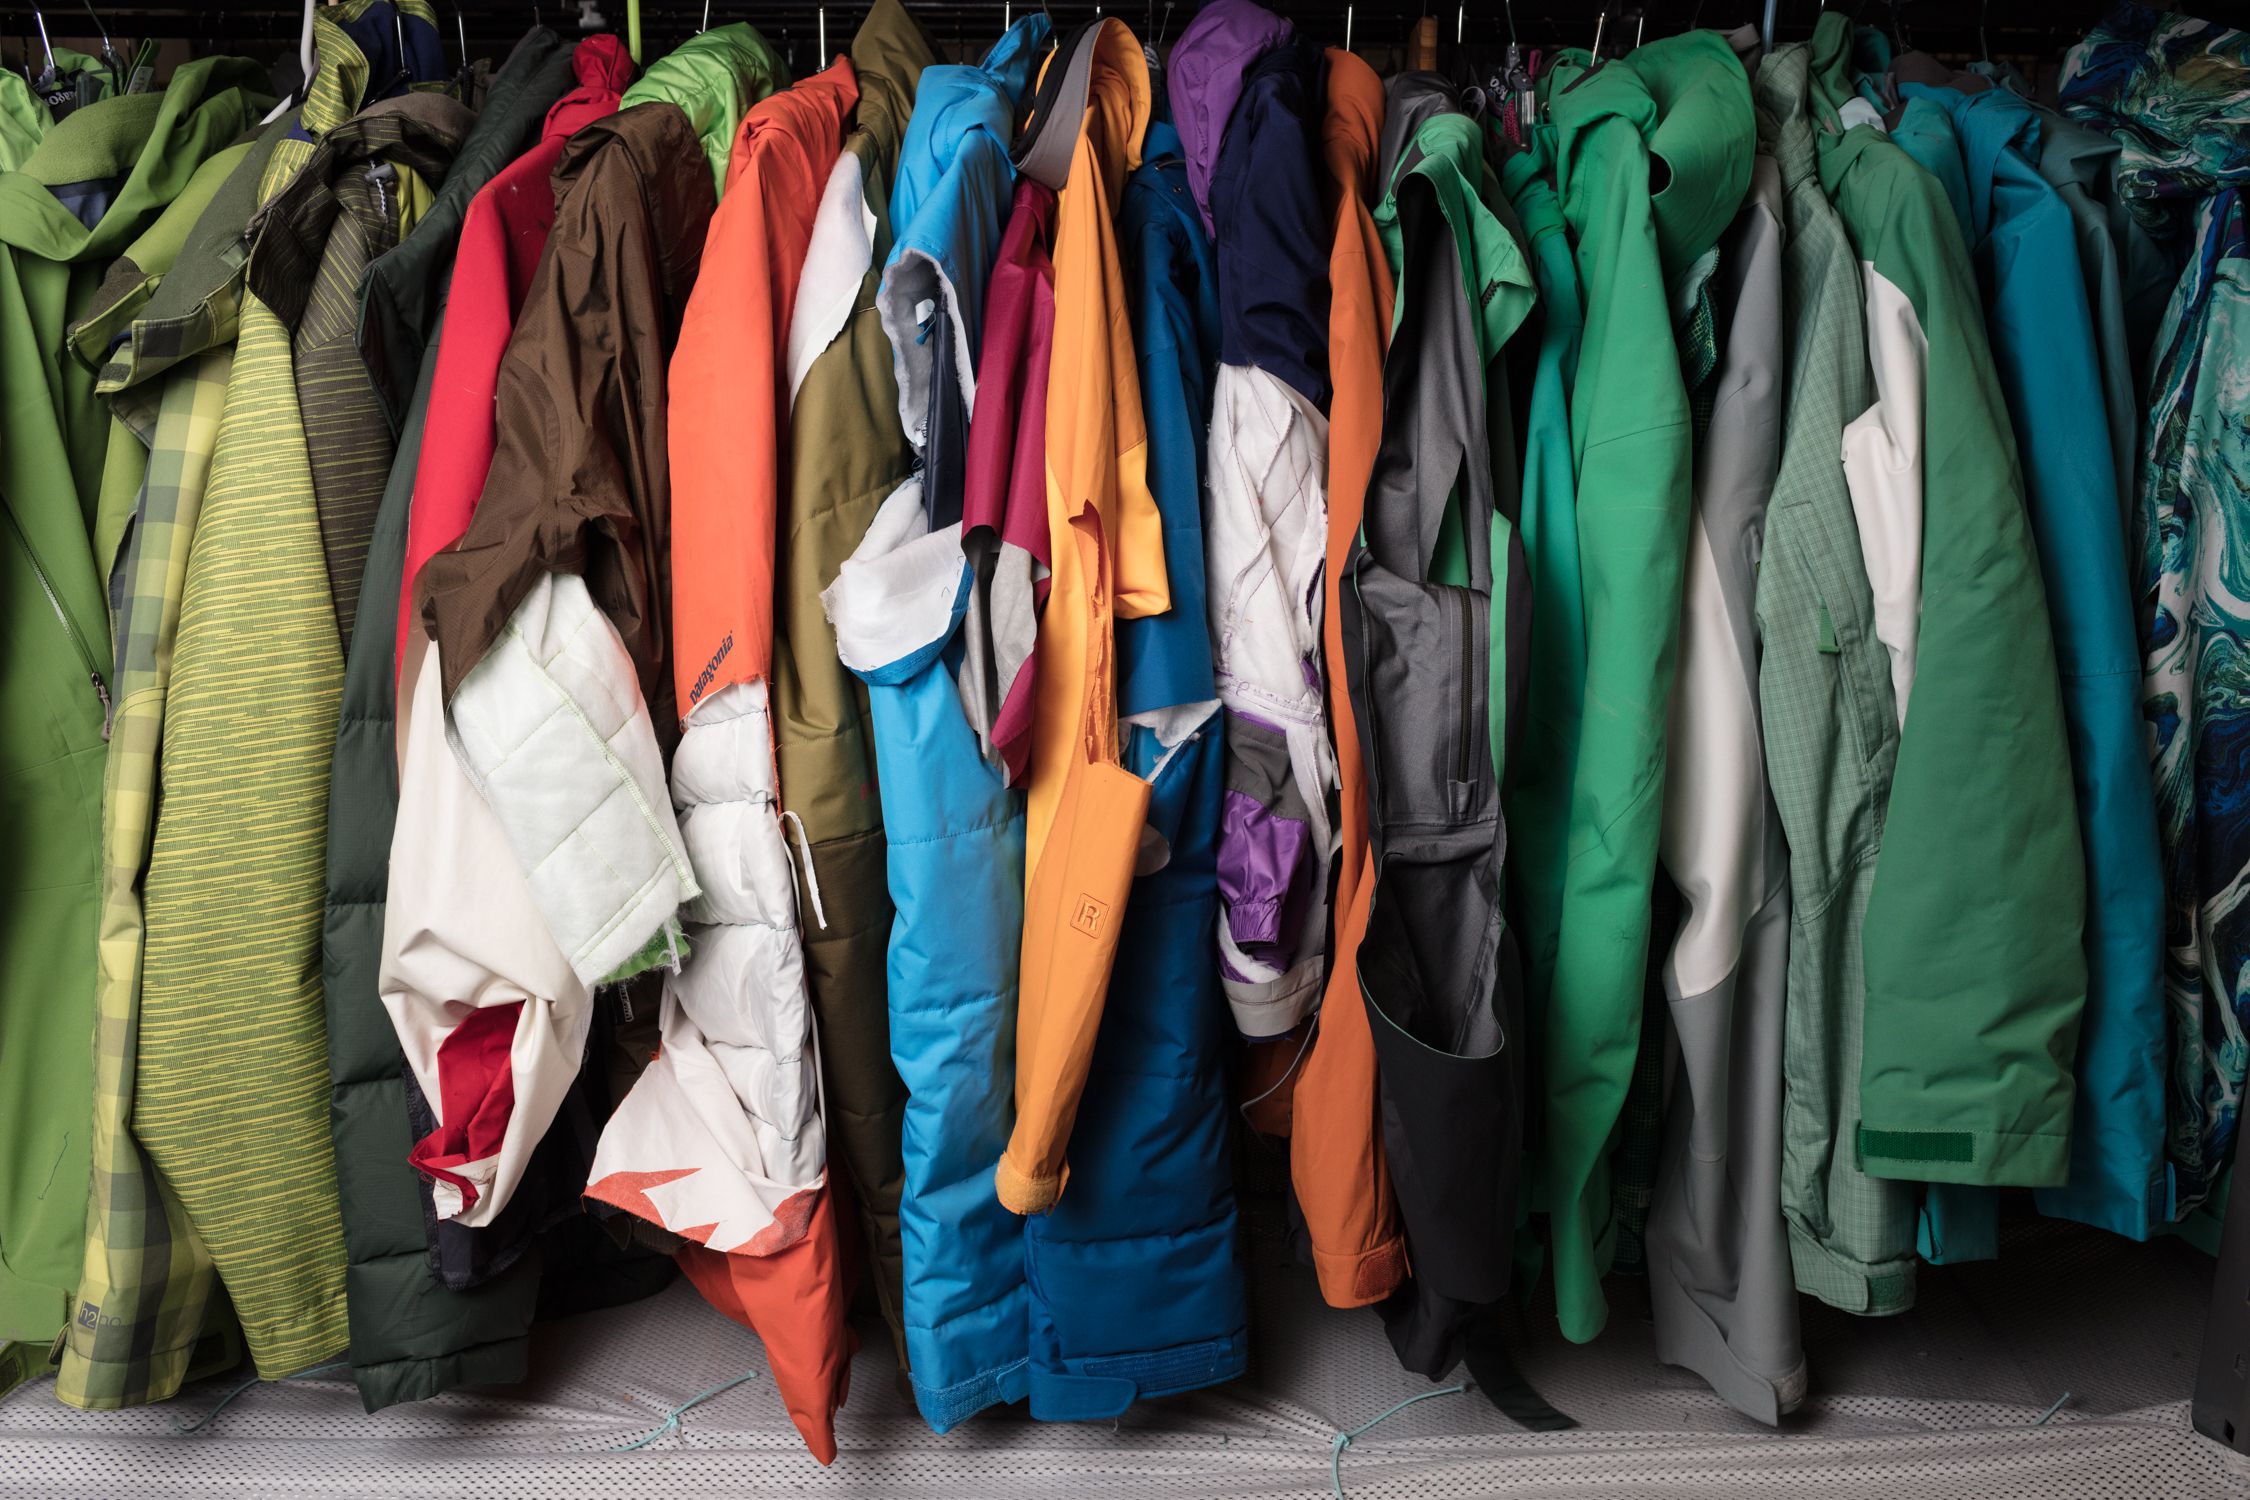 Smelte Bøje Parametre Inside Patagonia's operation to keep clothing out of landfills - The  Washington Post